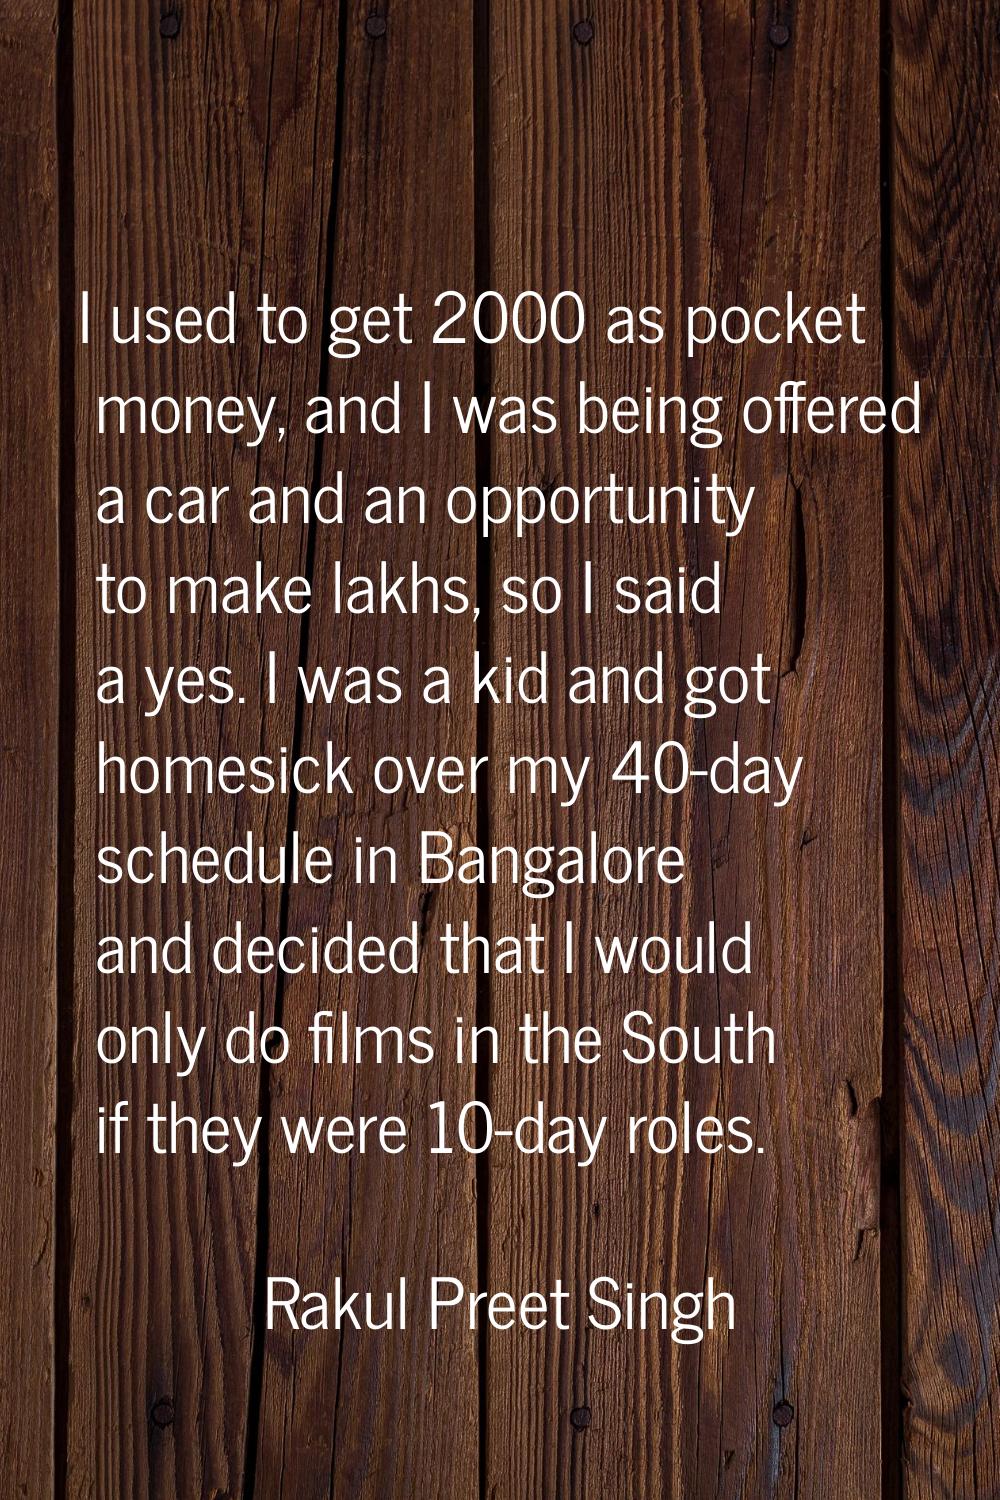 I used to get 2000 as pocket money, and I was being offered a car and an opportunity to make lakhs,